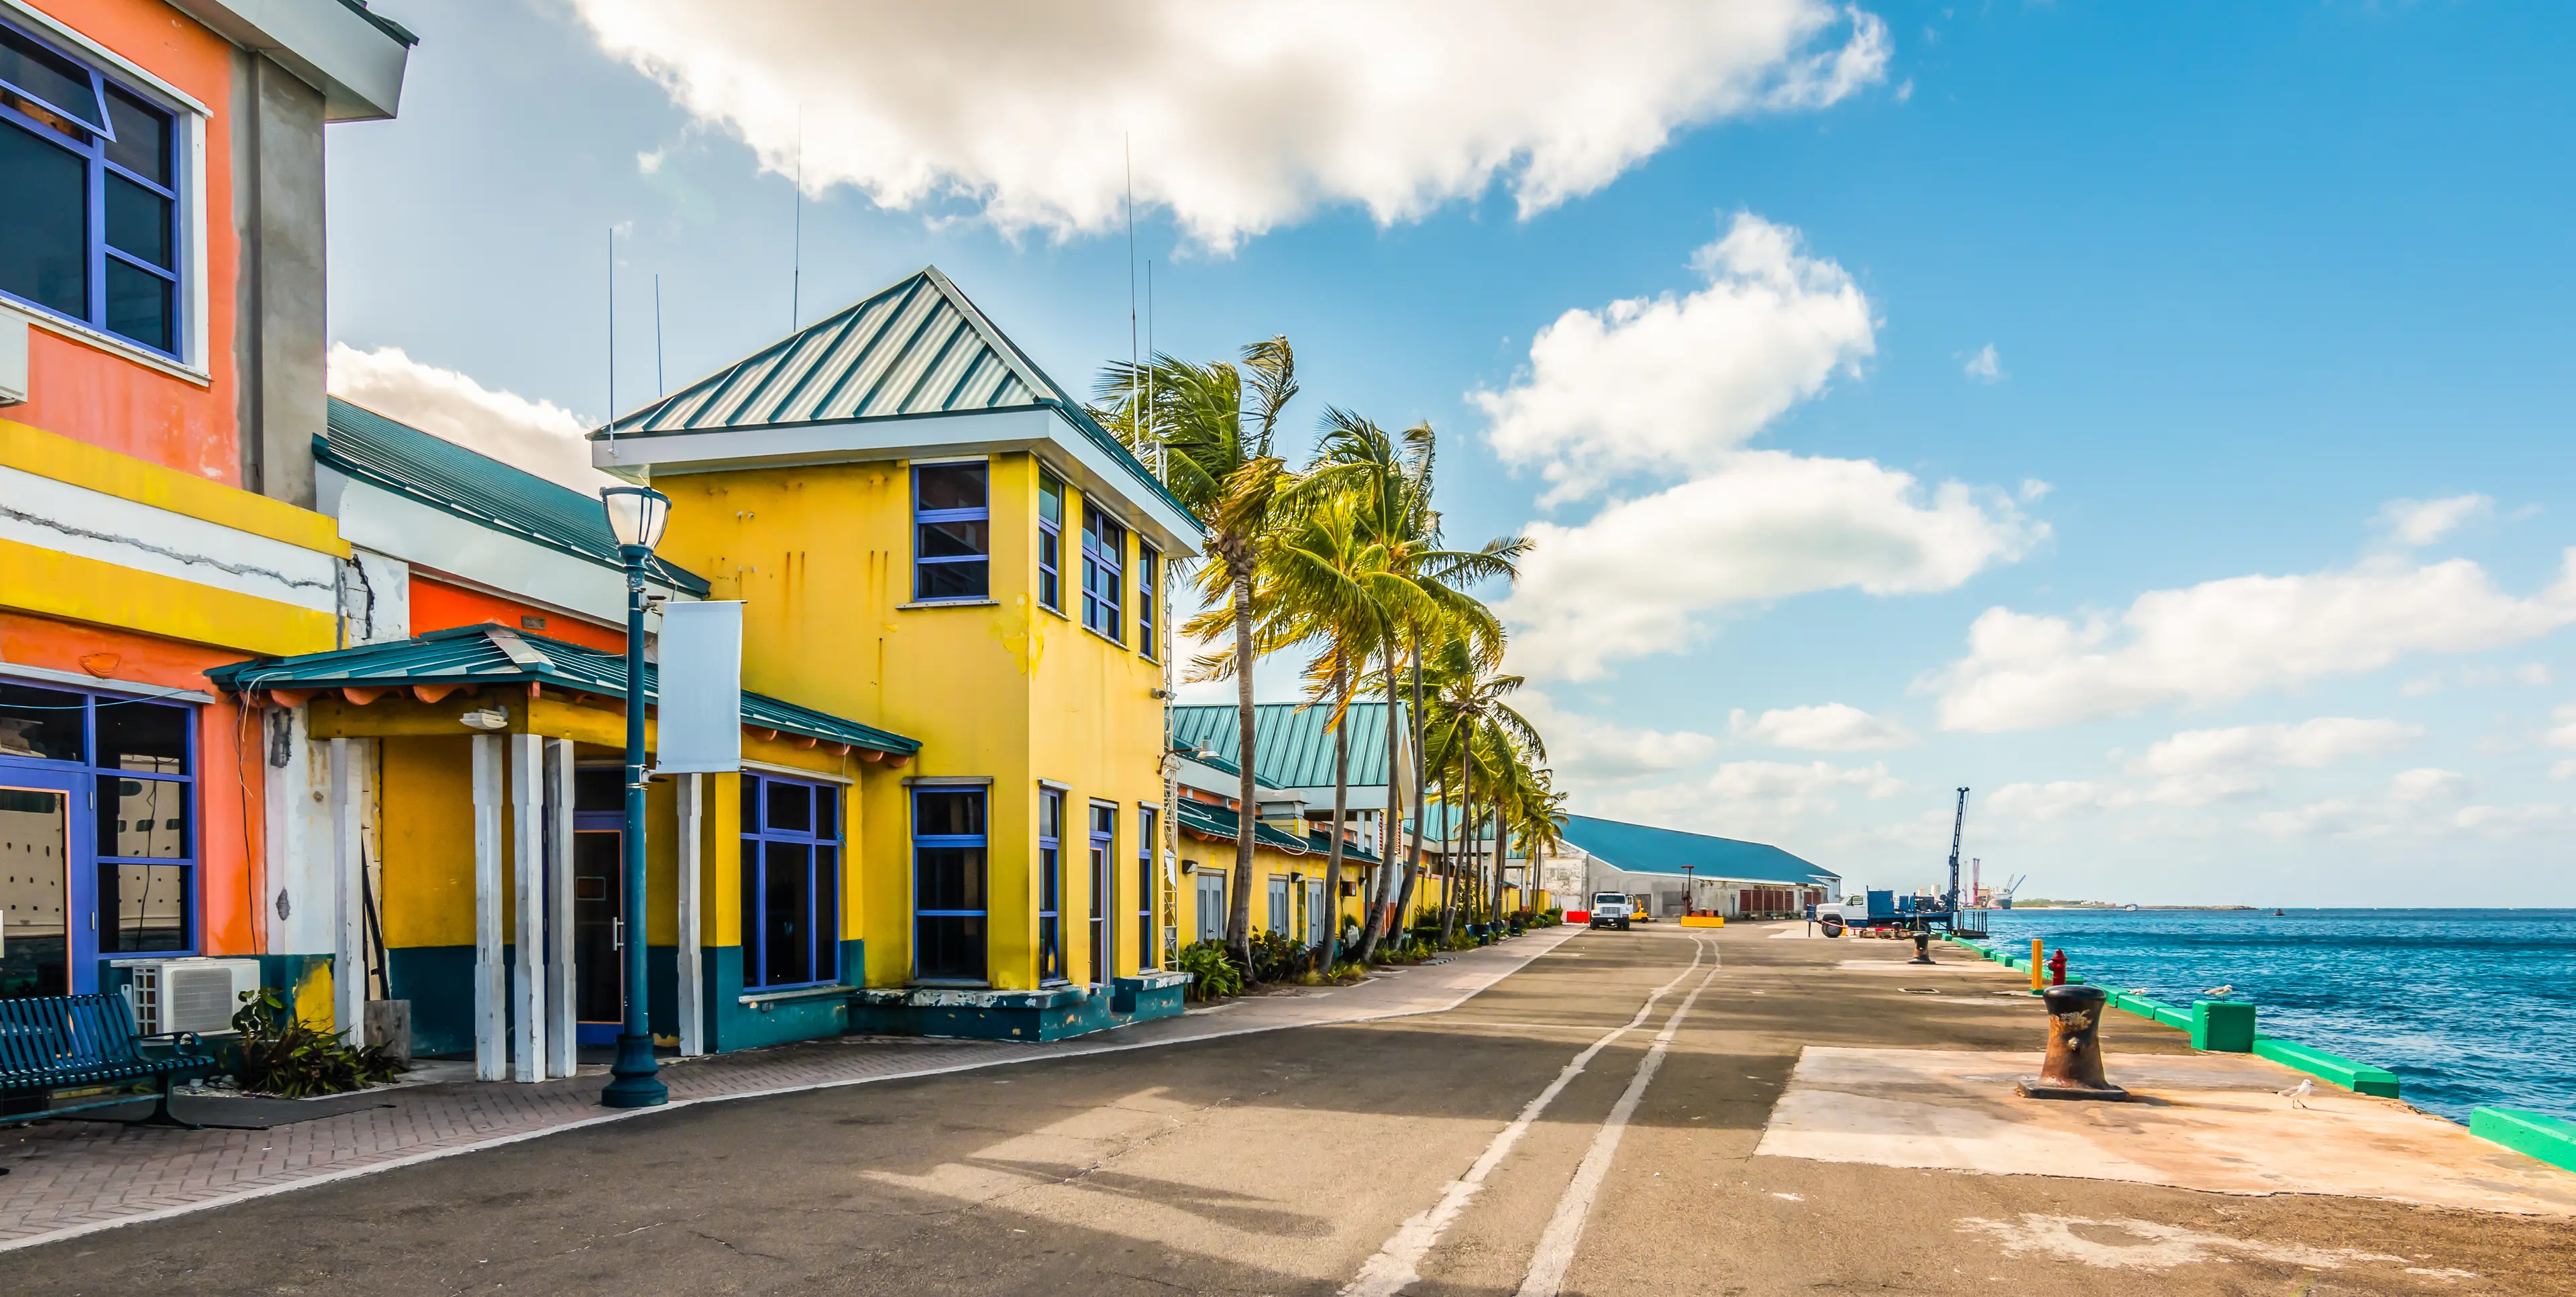 Colorful houses at the port of Nassau